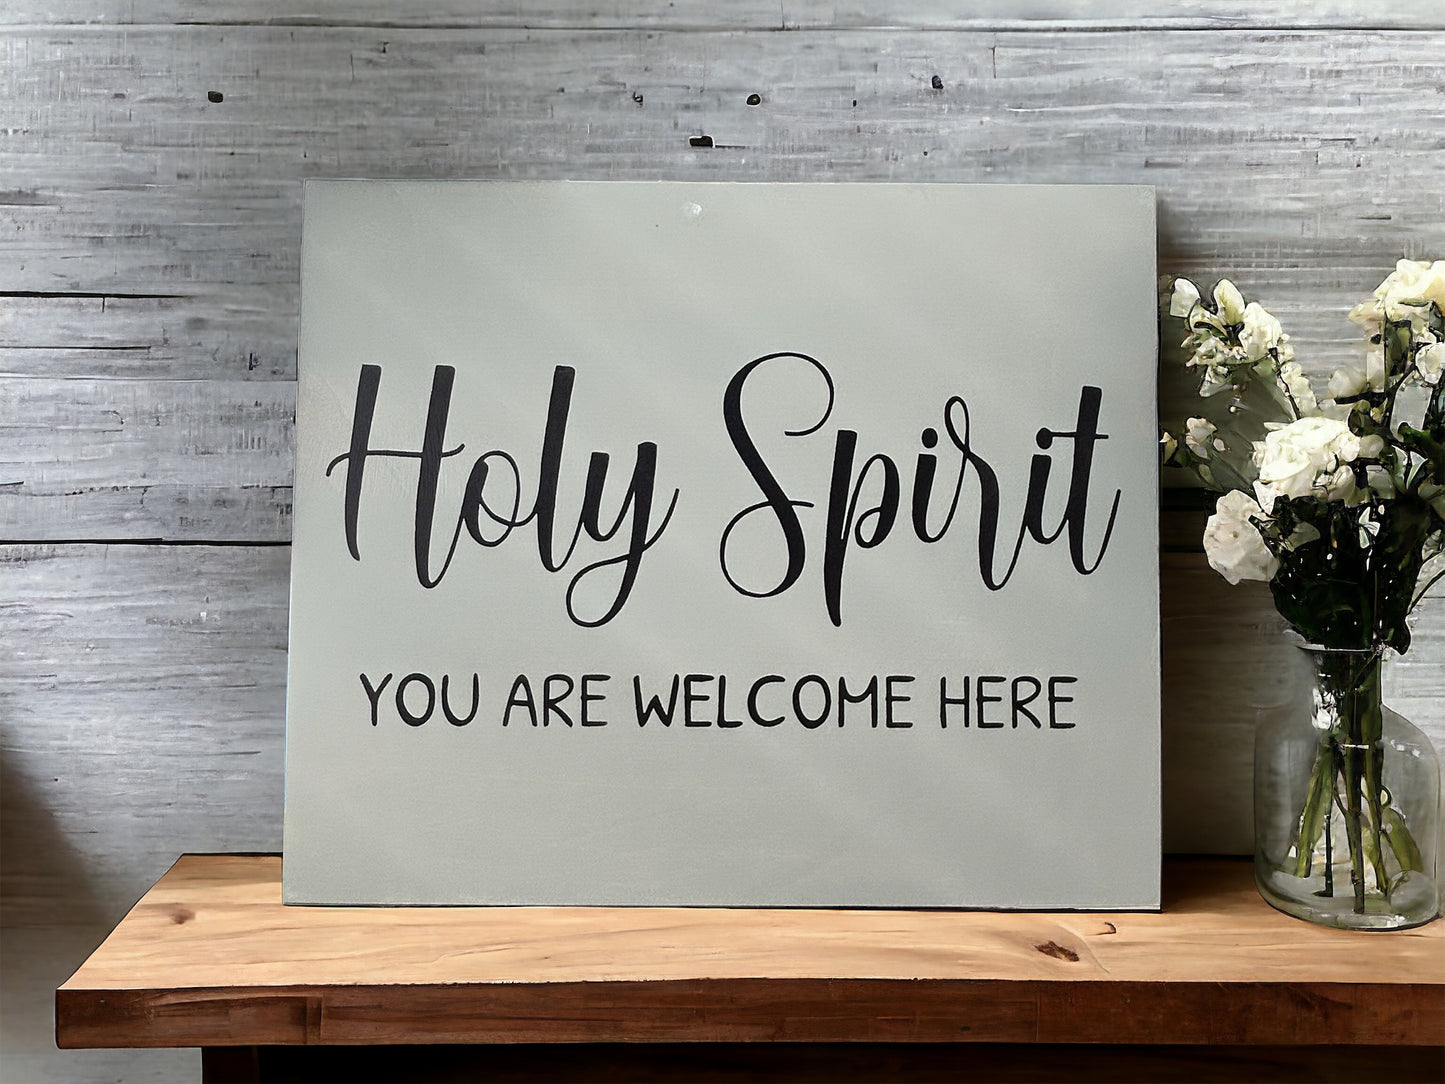 Holy Spirit You are Welcome Here - Rustic Wood Sign